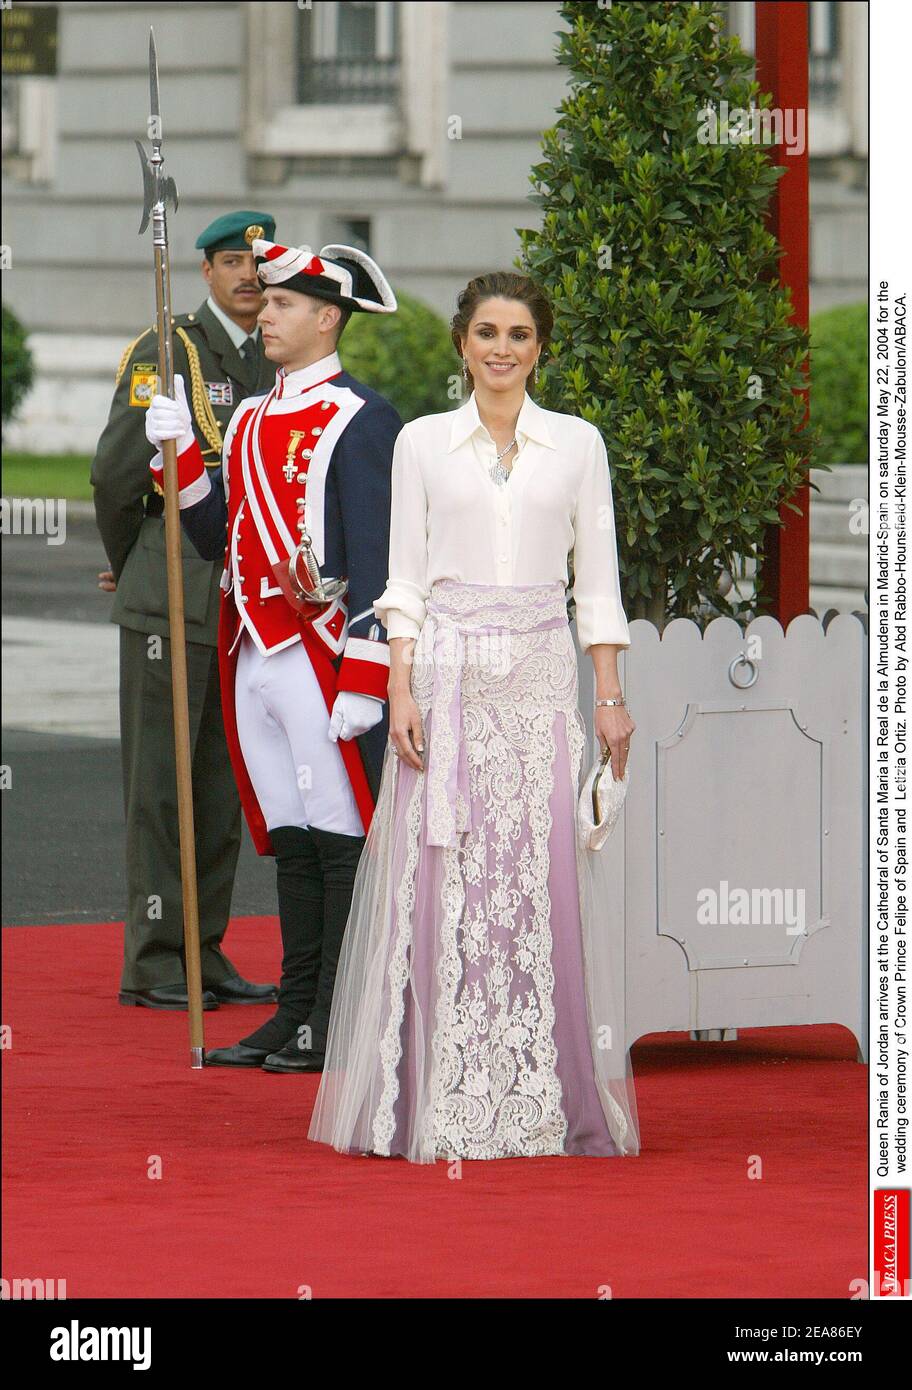 Queen Rania of Jordan arrives at the Cathedral of Santa Maria la Real de la Almudena in Madrid-Spain on saturday May 22, 2004 for the wedding ceremony of Crown Prince Felipe of Spain and Letizia Ortiz. Photo by Abd Rabbo-Hounsfield-Klein-Mousse-Zabulon/ABACA. Stock Photo